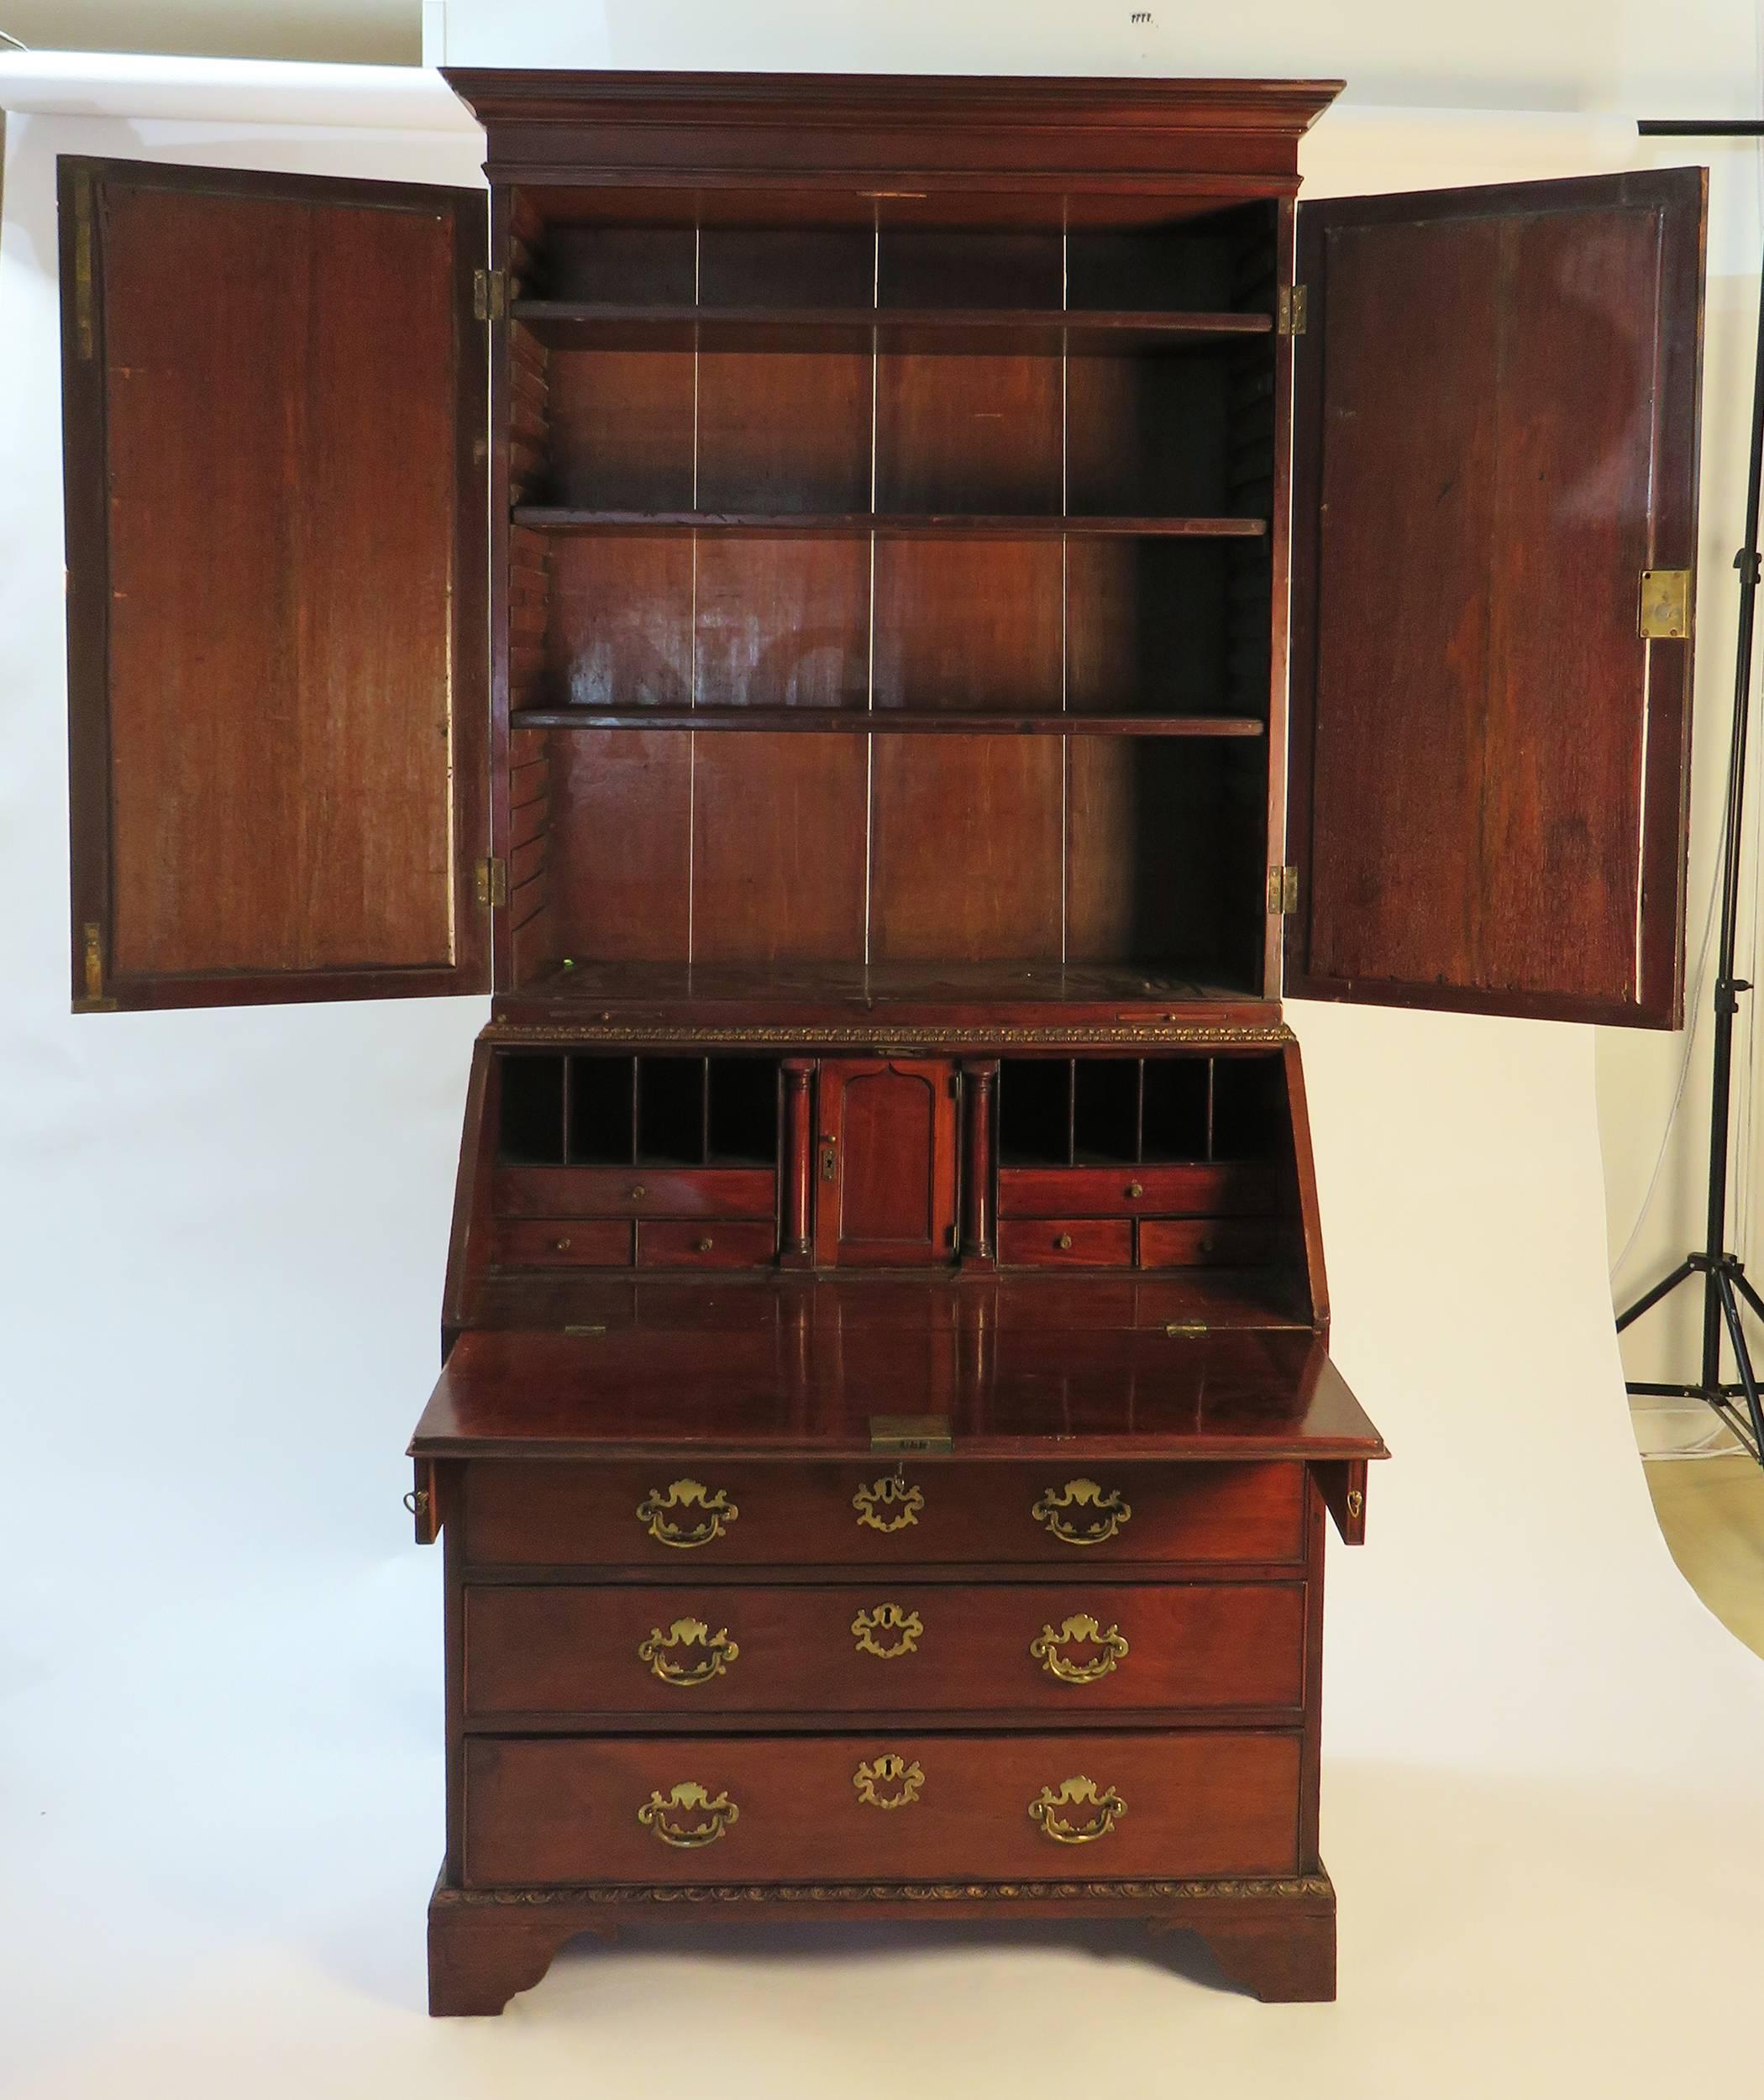 A very nice mahogany gilt slant front secretary bookcase with mirror and gilt accents. This particular design and construction is associated with Giles Grendy. We date this to the third quarter of the 18th century, circa 1770. The smaller scale of